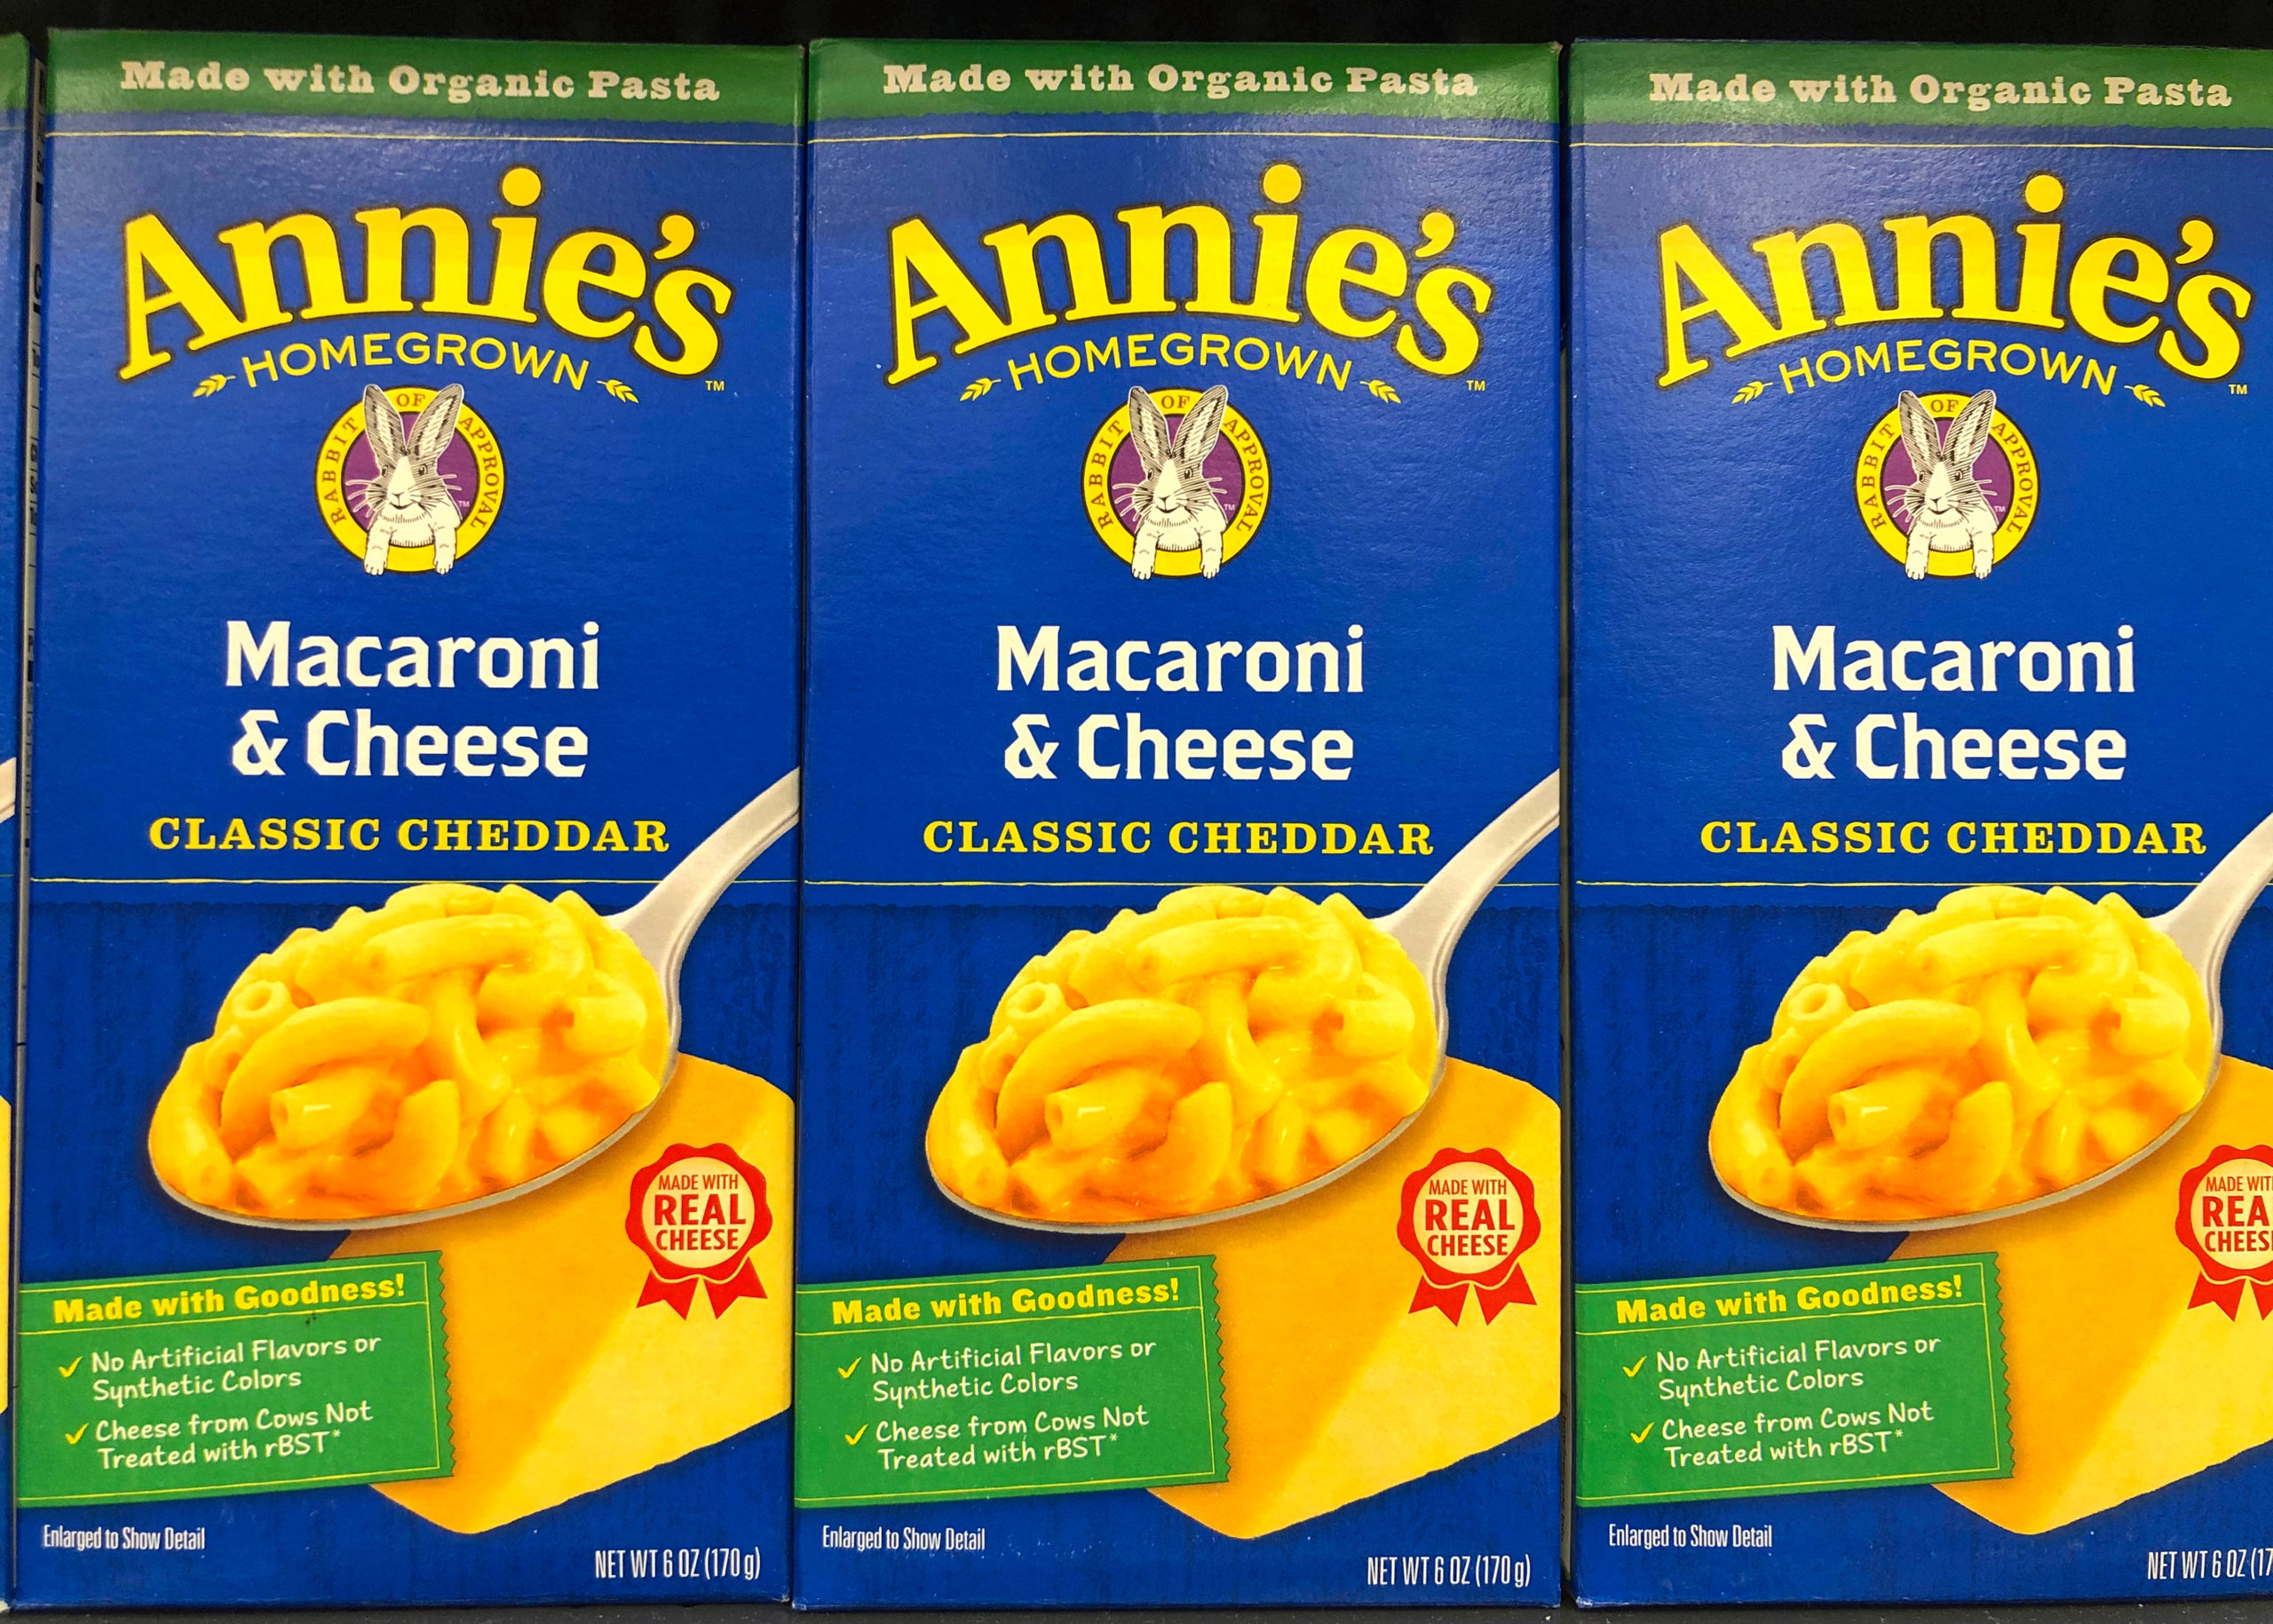 Class Action Lawsuit Filed Over Phthalates in Annie's Macaroni & Cheese